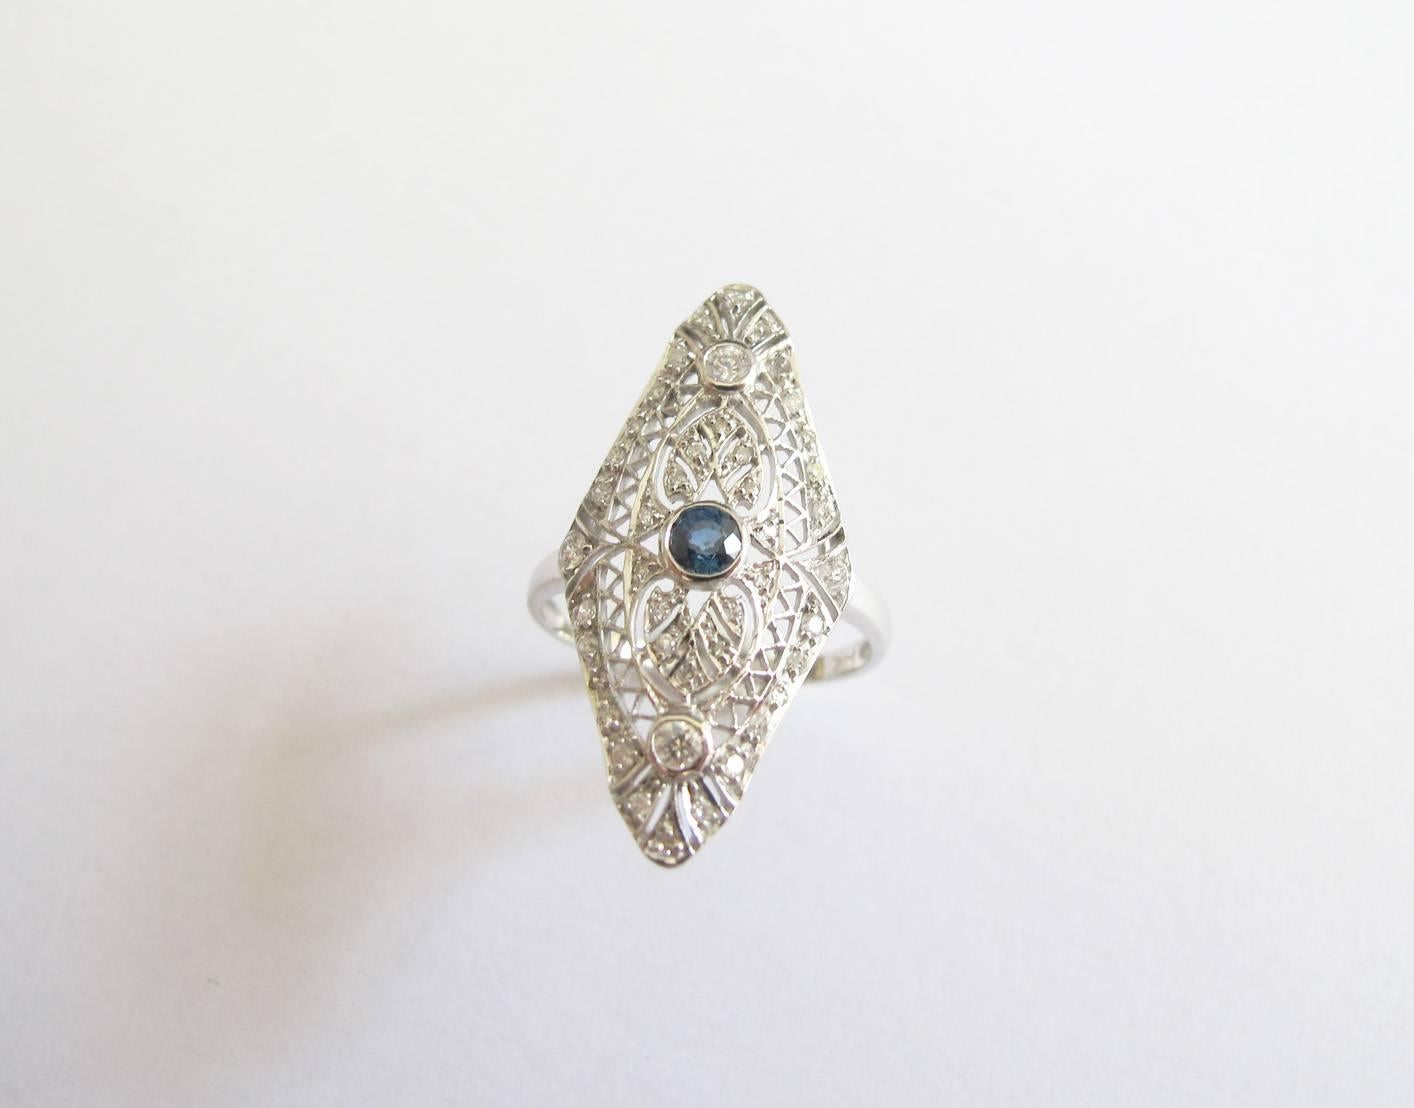 Reproduction of an antique-style cocktail ring, made in 14K white gold with one central sapphire and surrounding diamonds set in the detailed filagree.  A delicate and feminine piece.

Ring size: 6.5
Sapphire weight: 0.25ct
Diamond weight: 0.40ct
